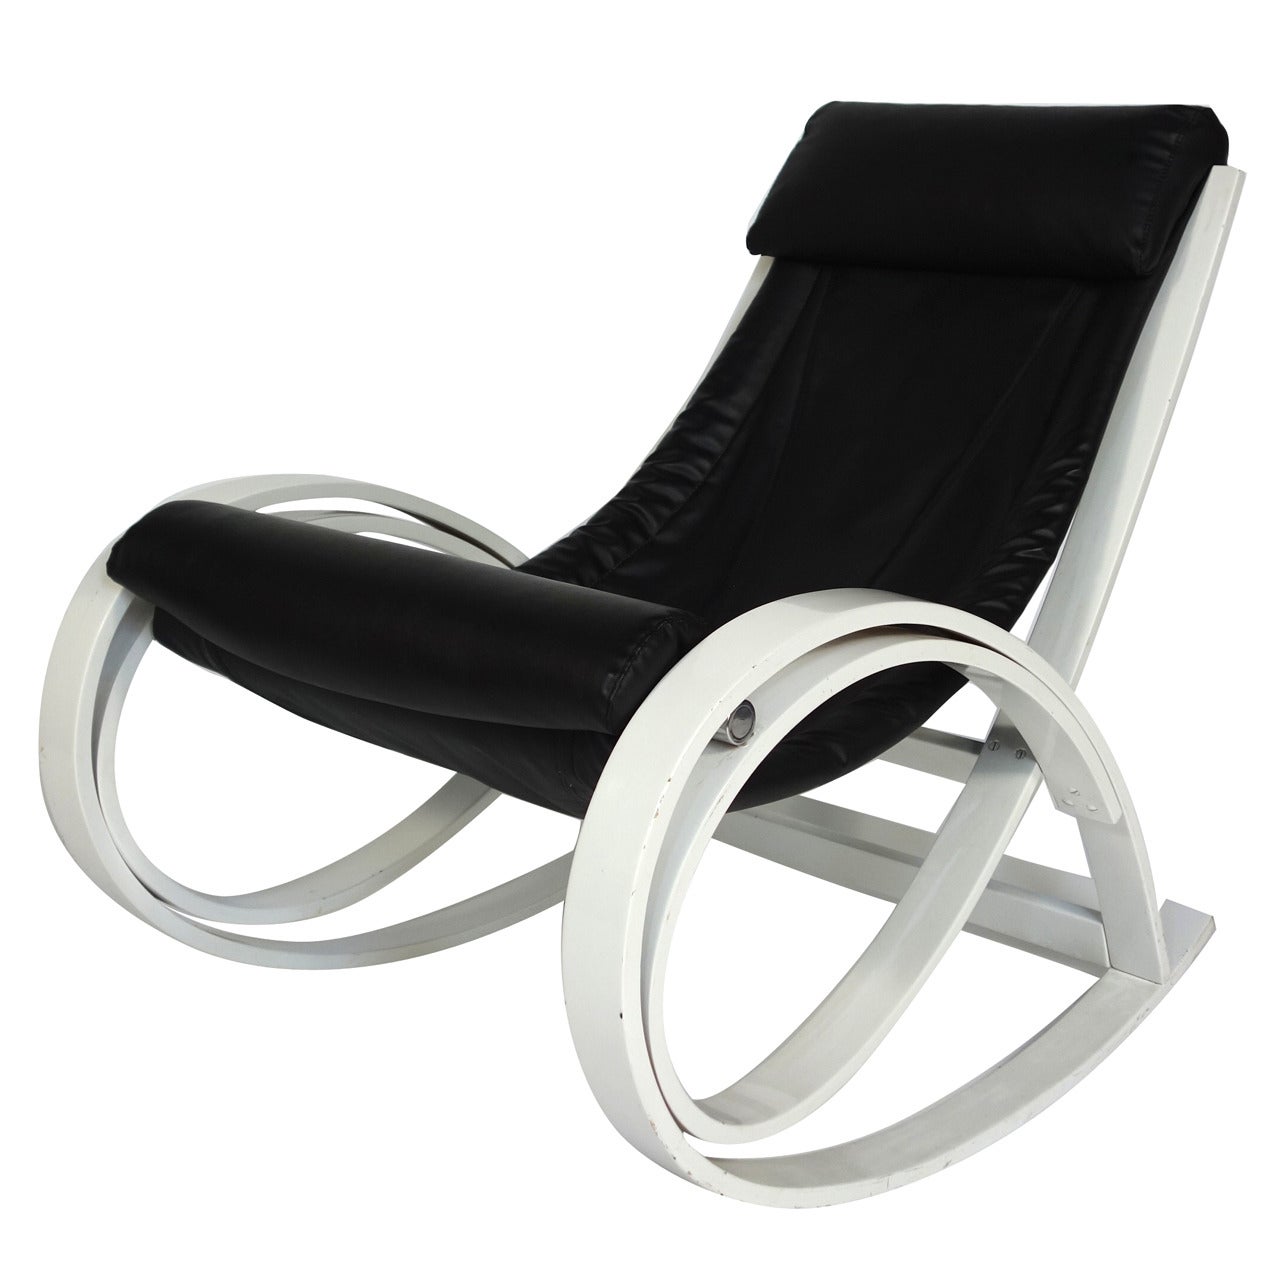 Gae Aulenti Iconic Rocking Chair For Sale